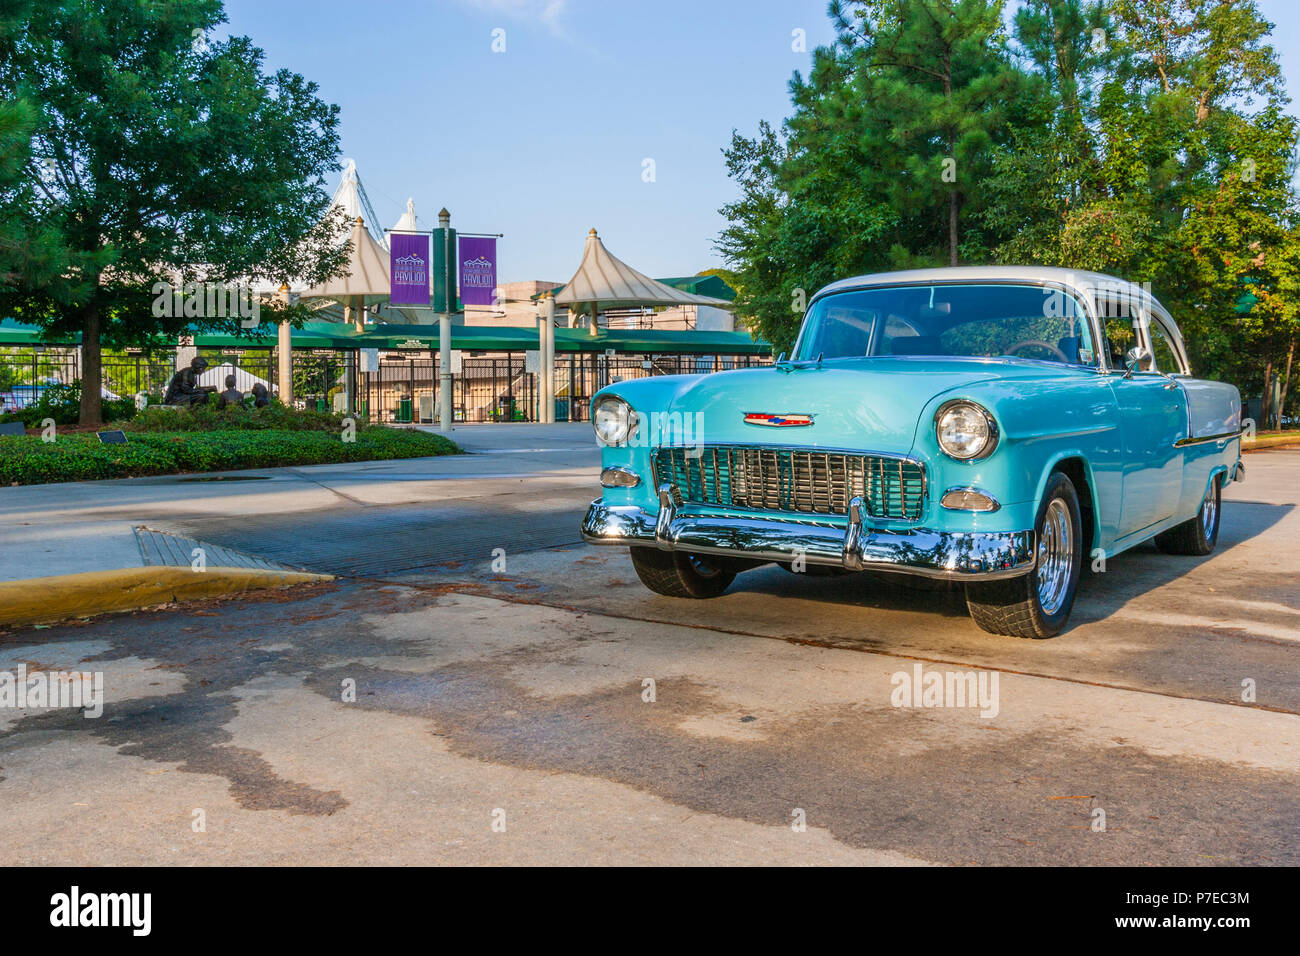 Classic Car at The Cynthia Woods Mitchell Pavilion in The Woodlands, Texas. Stock Photo